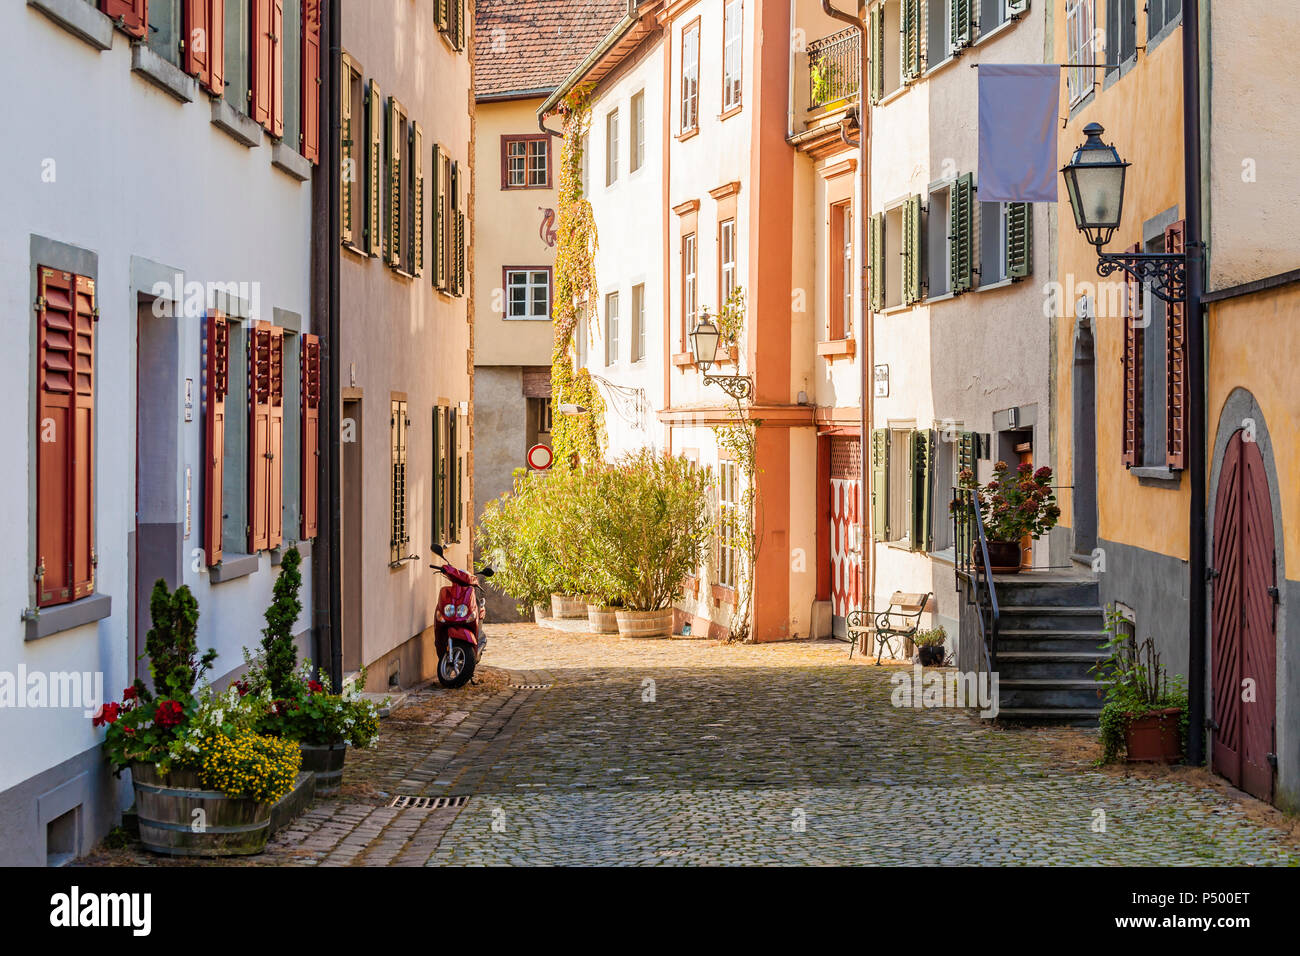 Austria, Vorarlberg, Bregenz, Upper city, alley and row of old houses Stock Photo